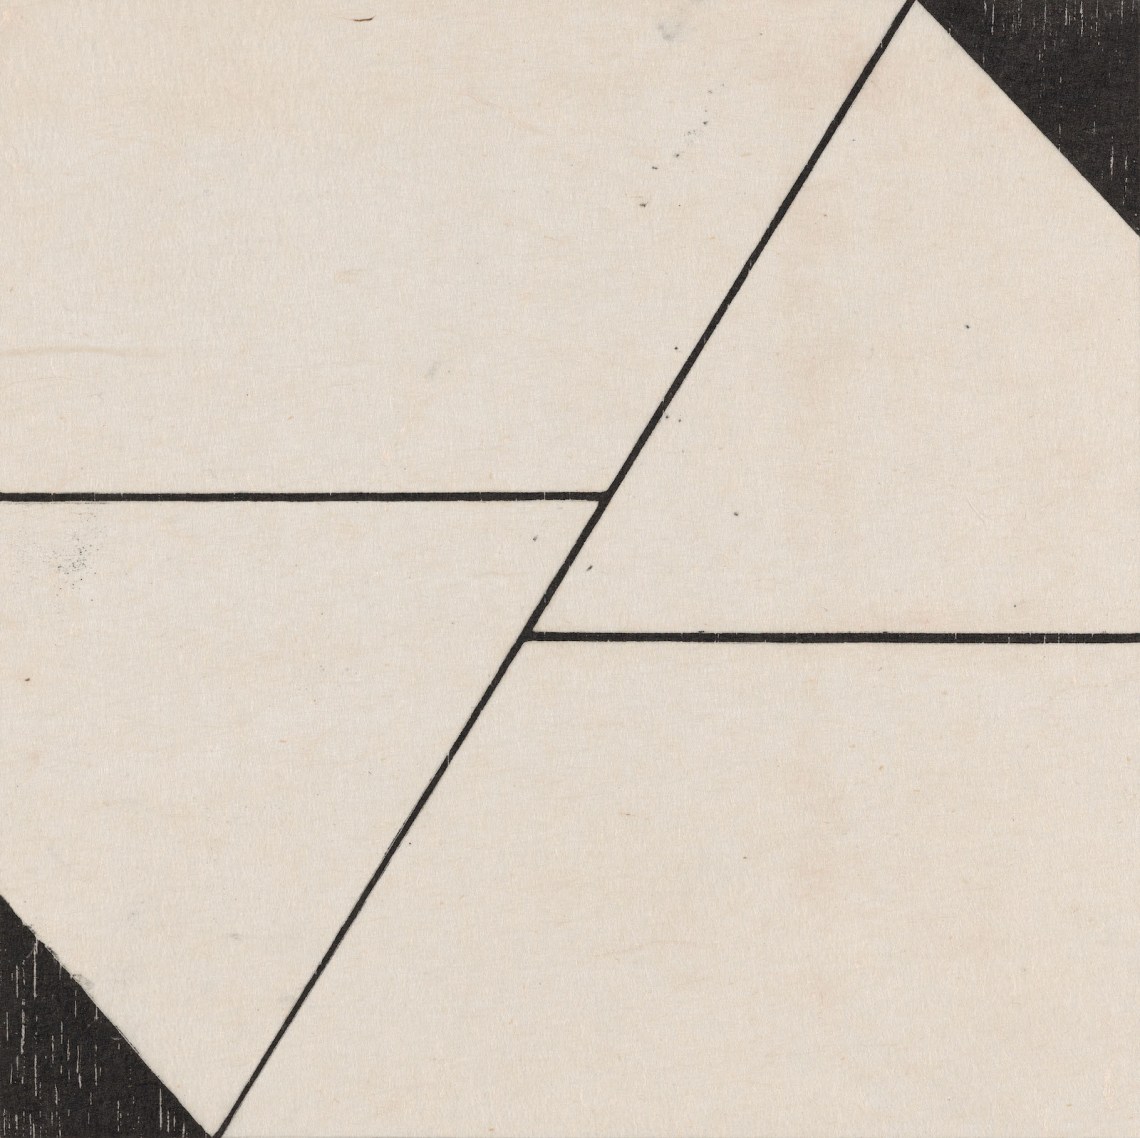 A black and white print, square, two black central horizontal lines meet one diagonal line. The top right and lower left corners are black triangles